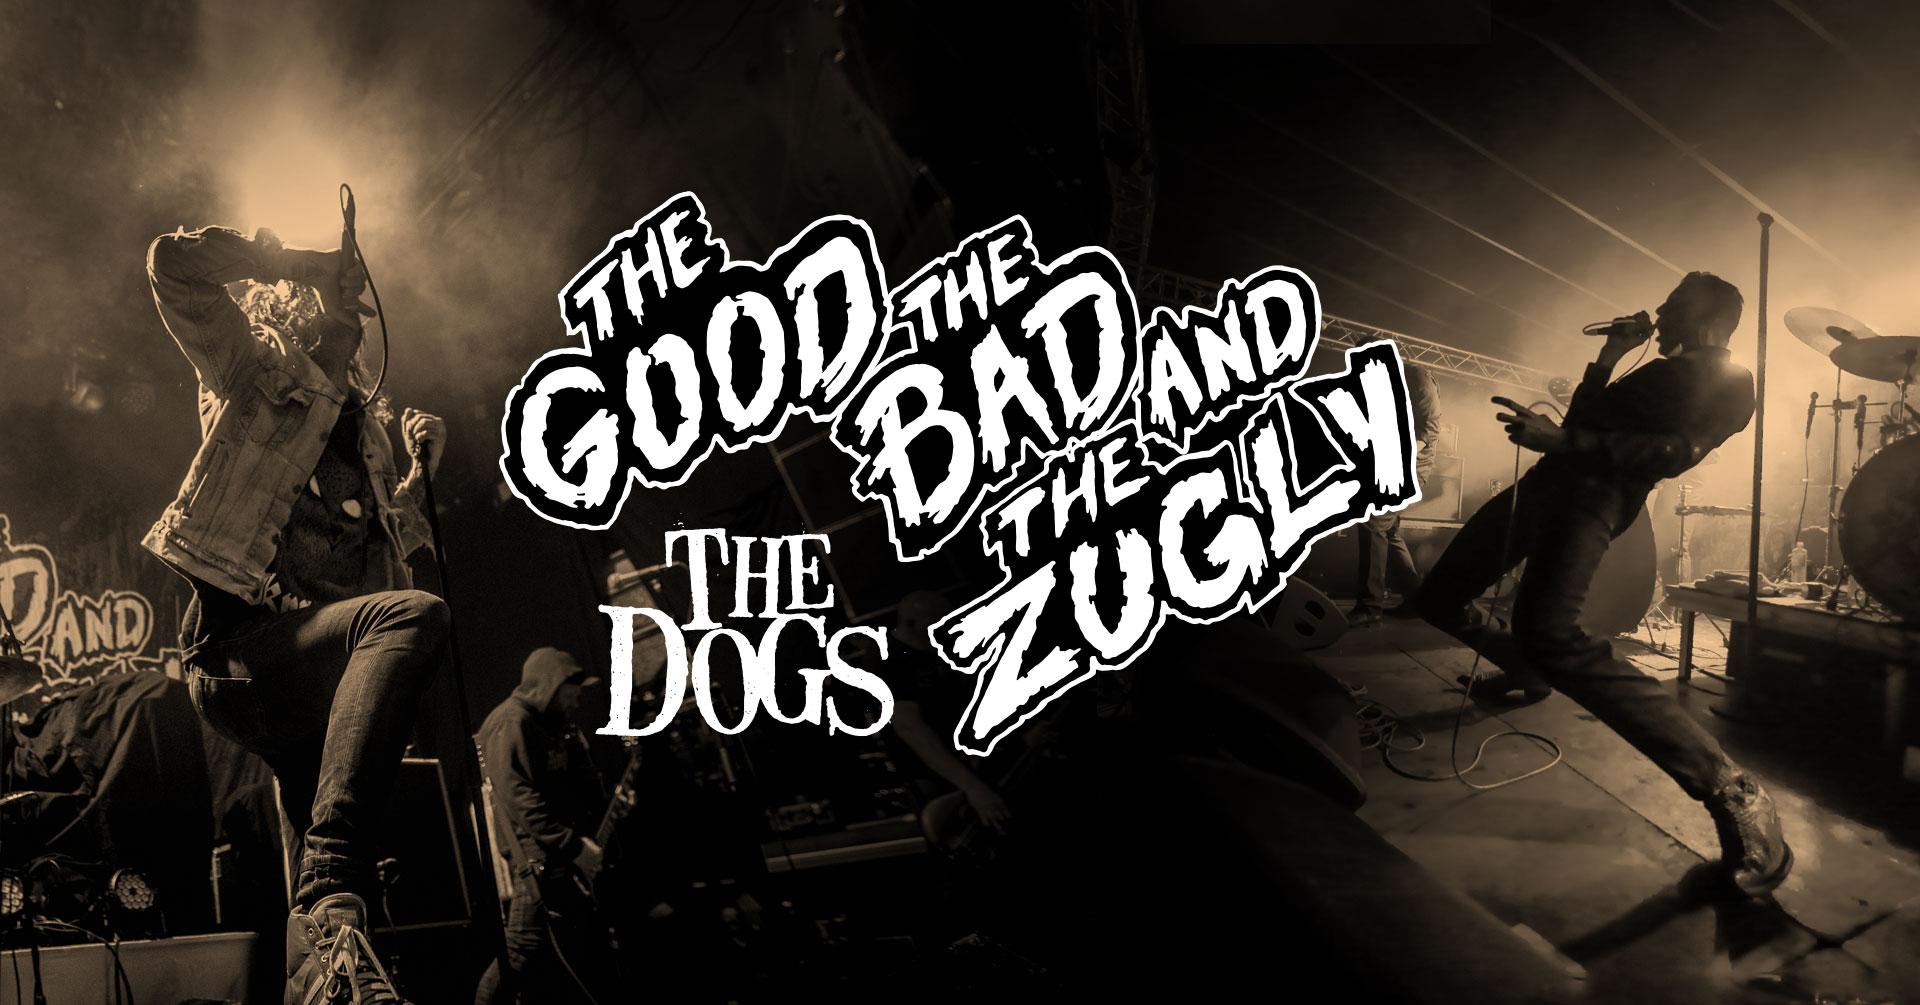 THE GOOD THE BAD AND THE ZUGLY – ABGESAGT!